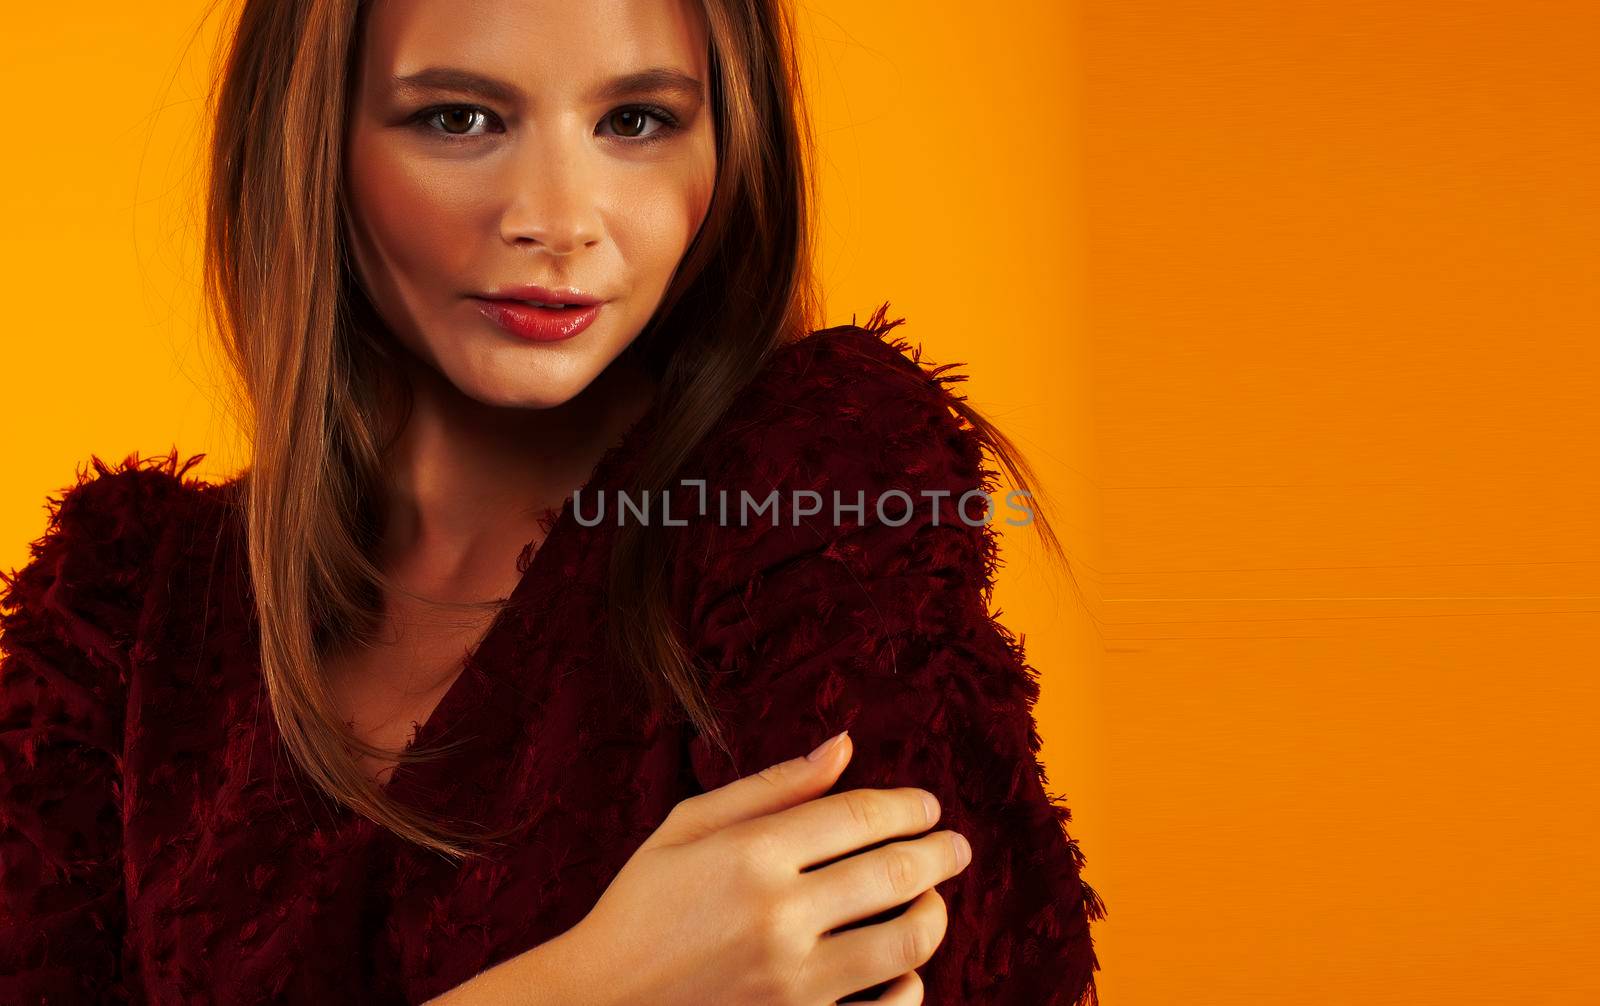 young pretty woman posing in fashion style on yellow background, lifestyle people concept close up